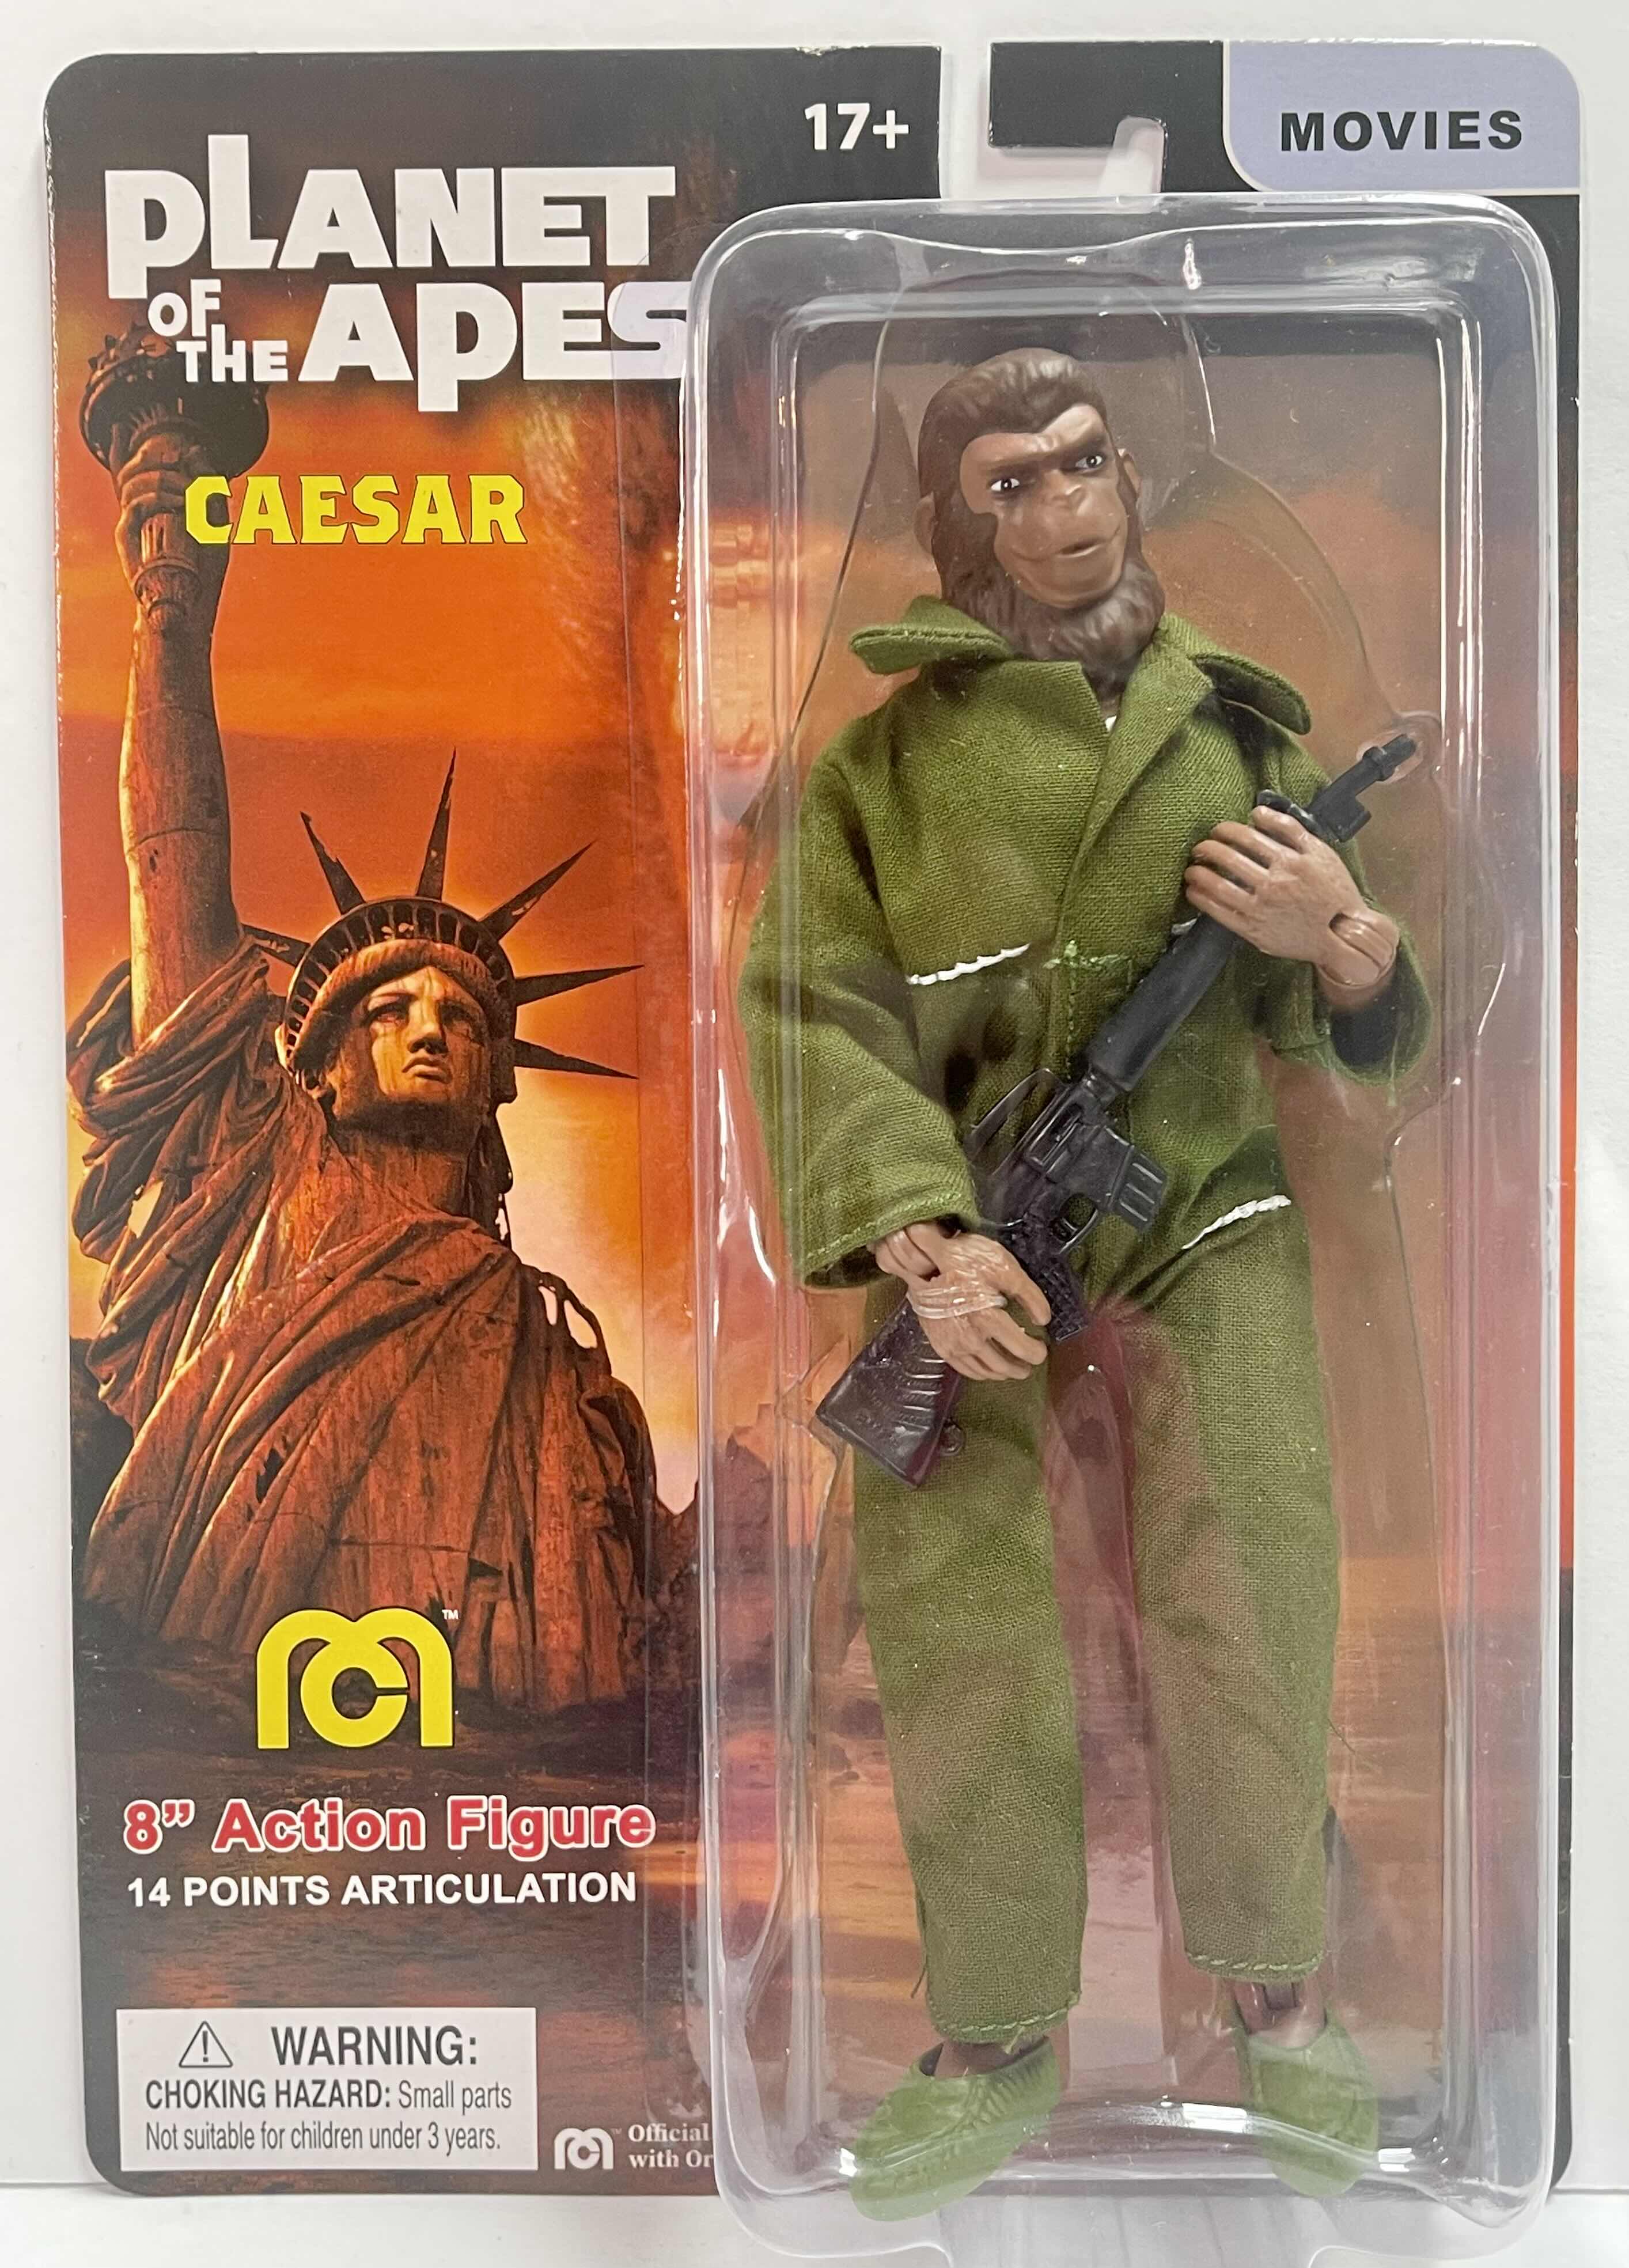 Photo 1 of NIB PLANET OF THE APES “CAESAR” 8" MEGO ACTION FIGURE- RETAIL PRICE $20.00